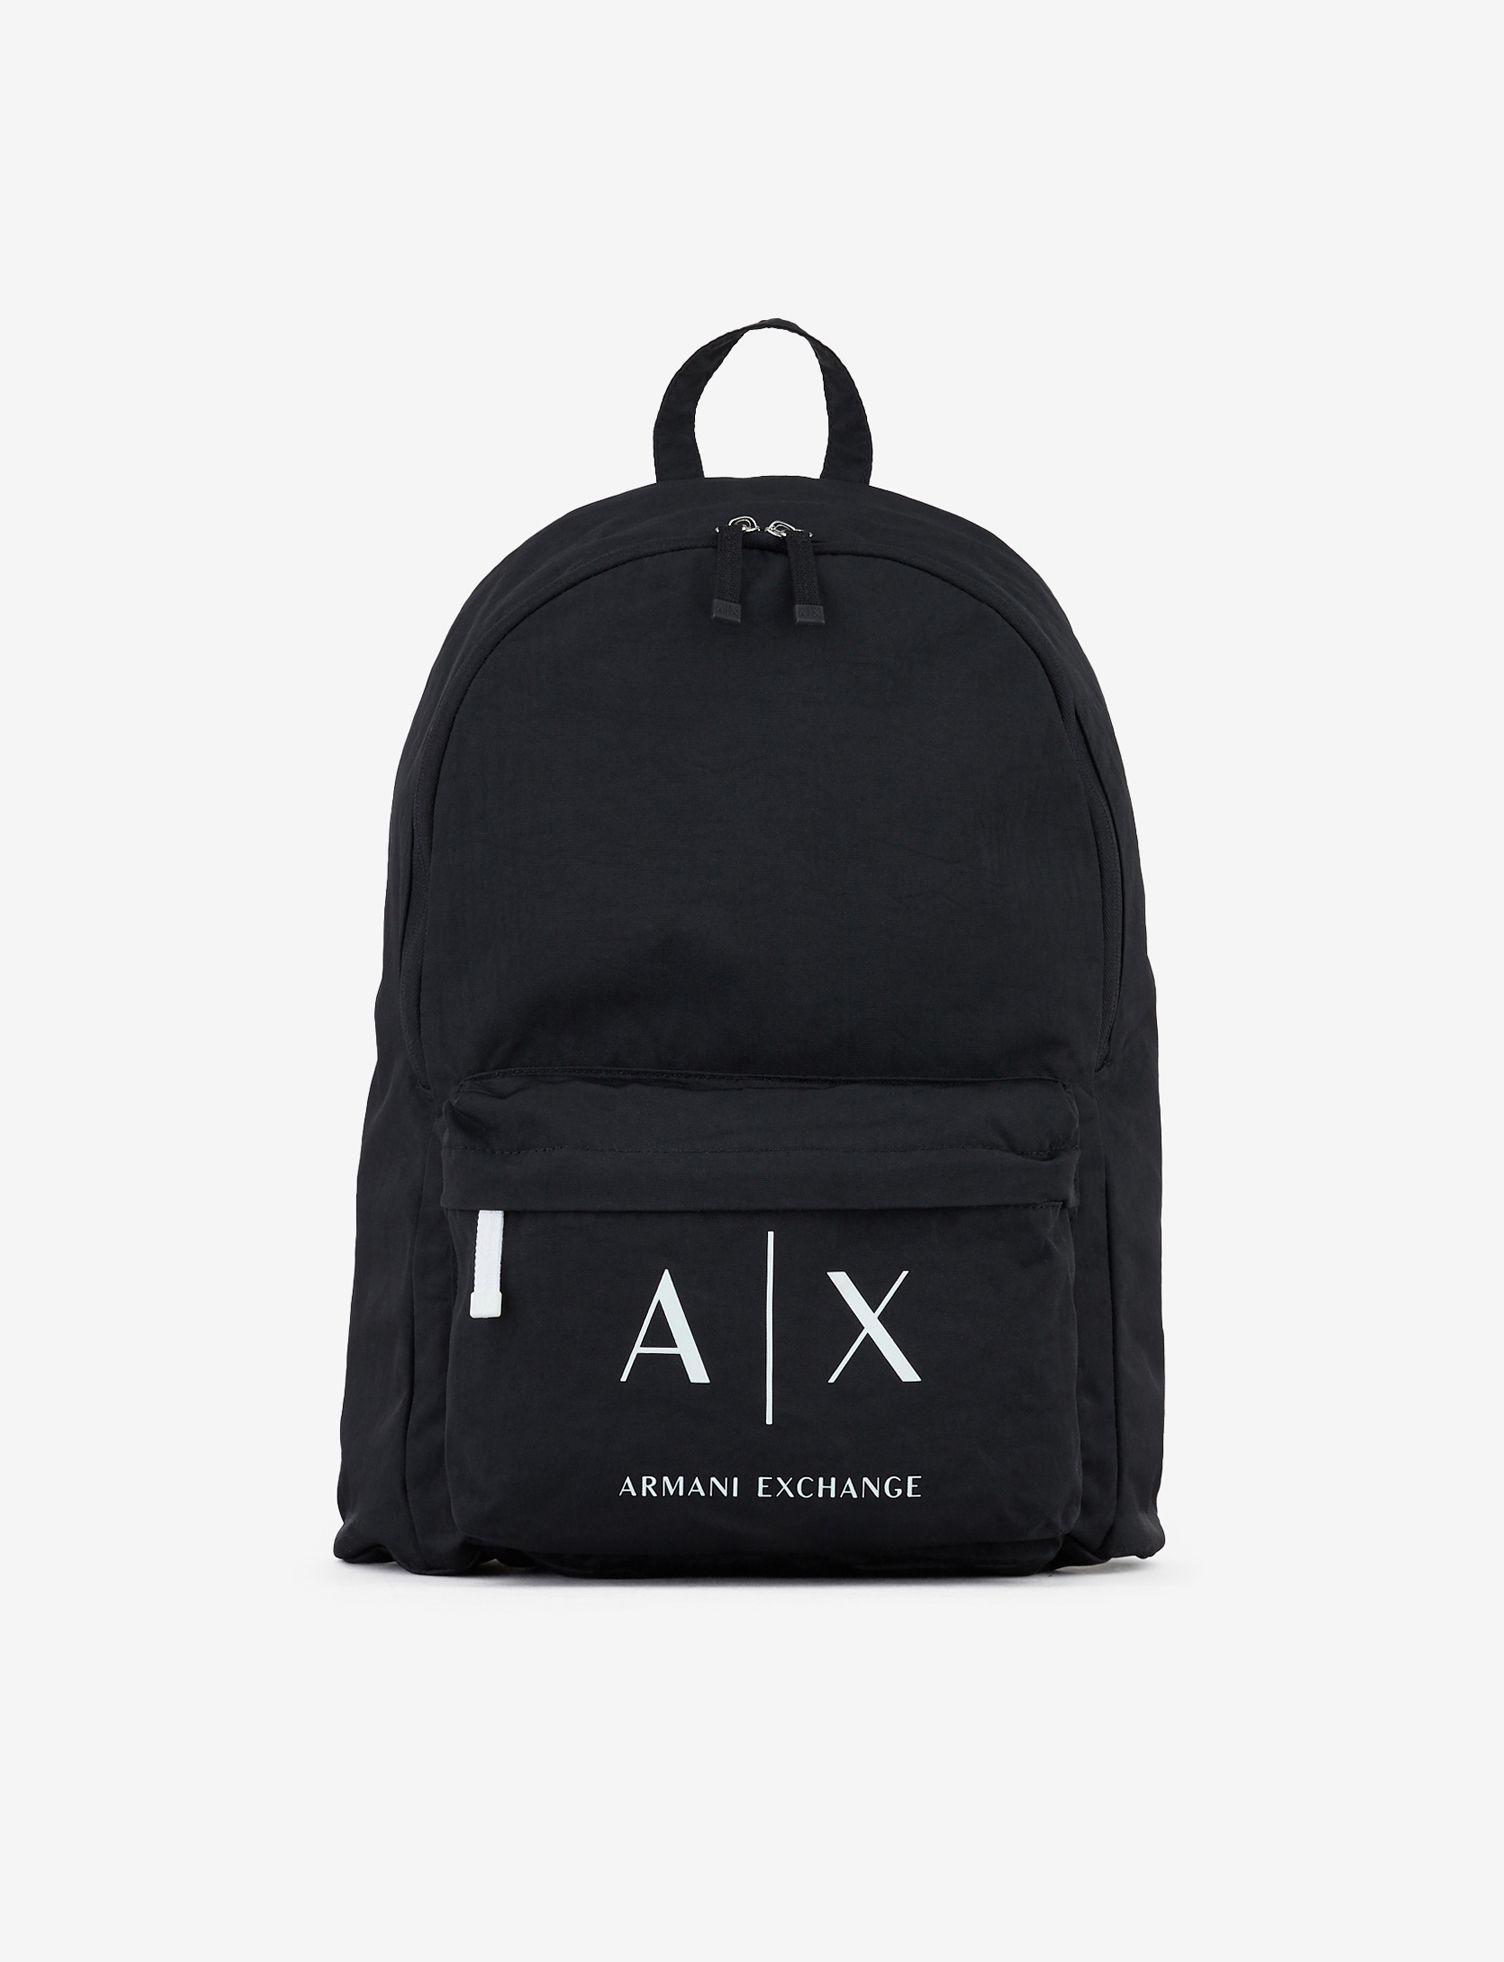 Armani Exchange Synthetic Logo Backpack in Black for Men - Lyst